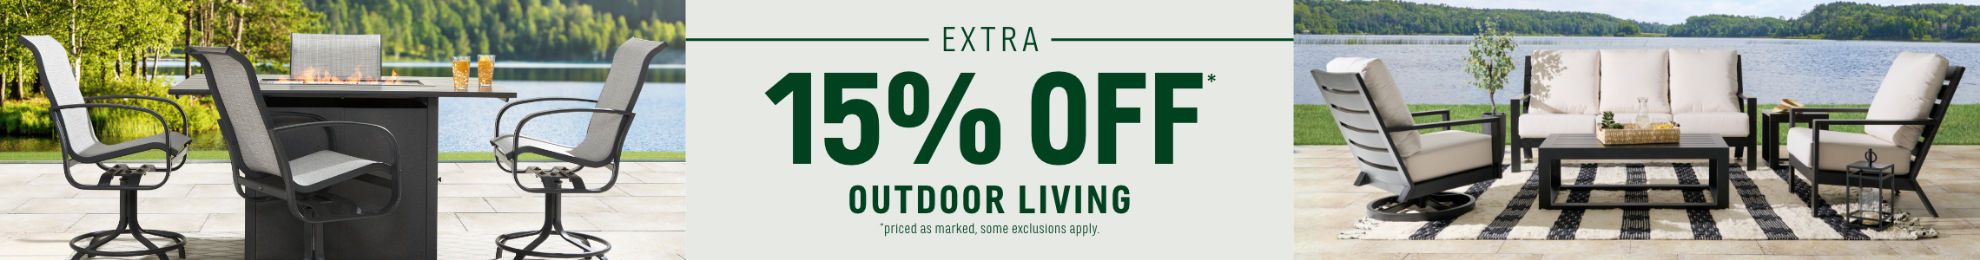 Extra 15% off Outdoor Living* | *priced as marked, some exclusions apply